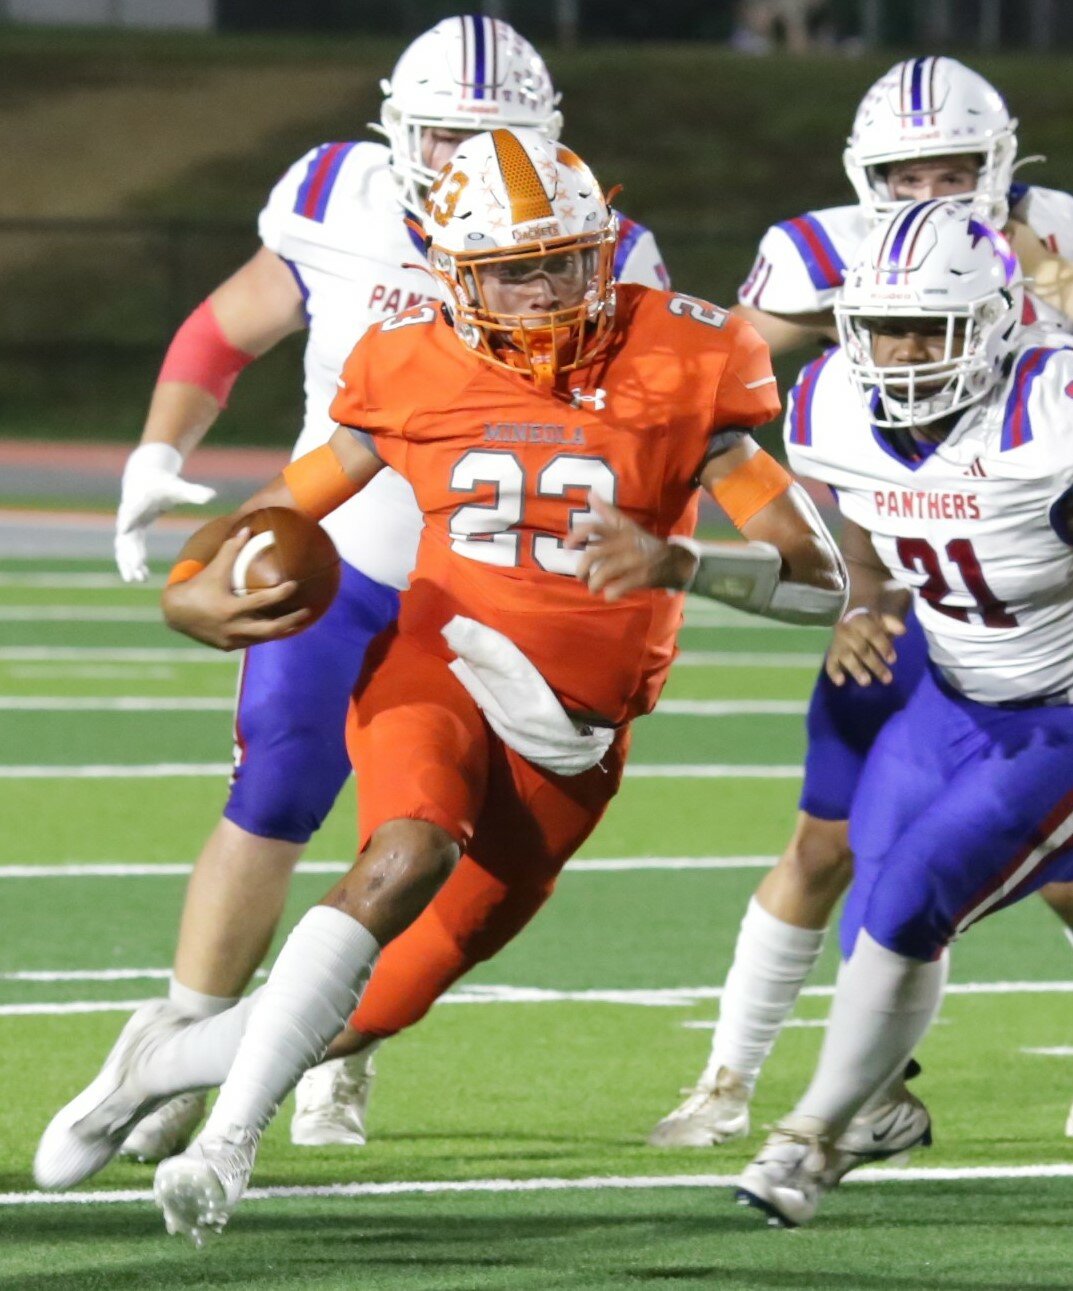 Mineola stand-out Braydon Alley on the move.